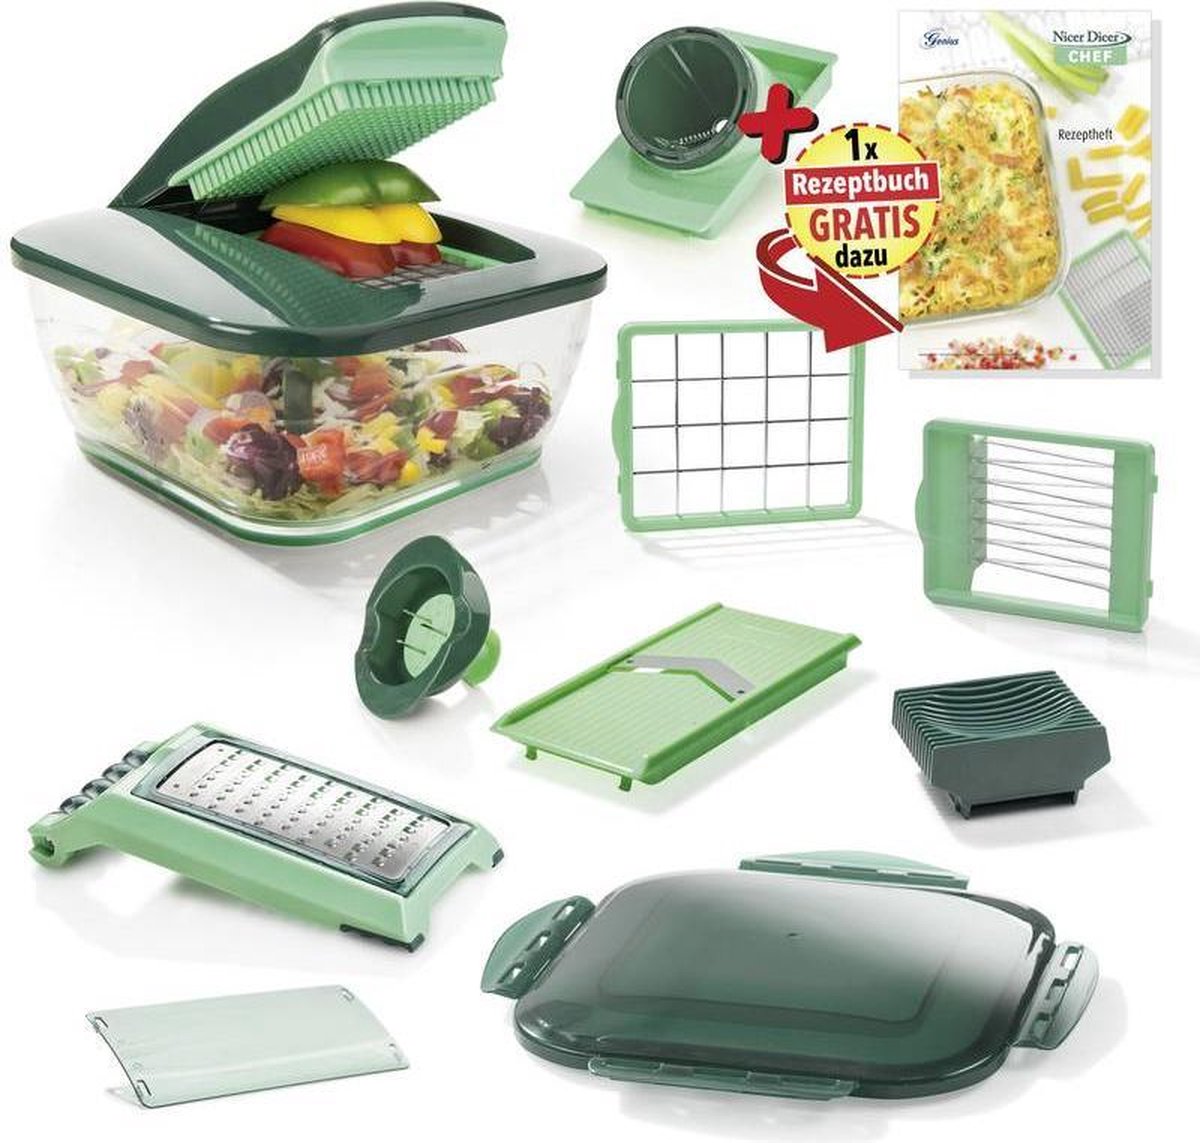 Luxe specificatie Slordig Genius Nicer Dicer Chef snijmachine 15-delig | bol.com